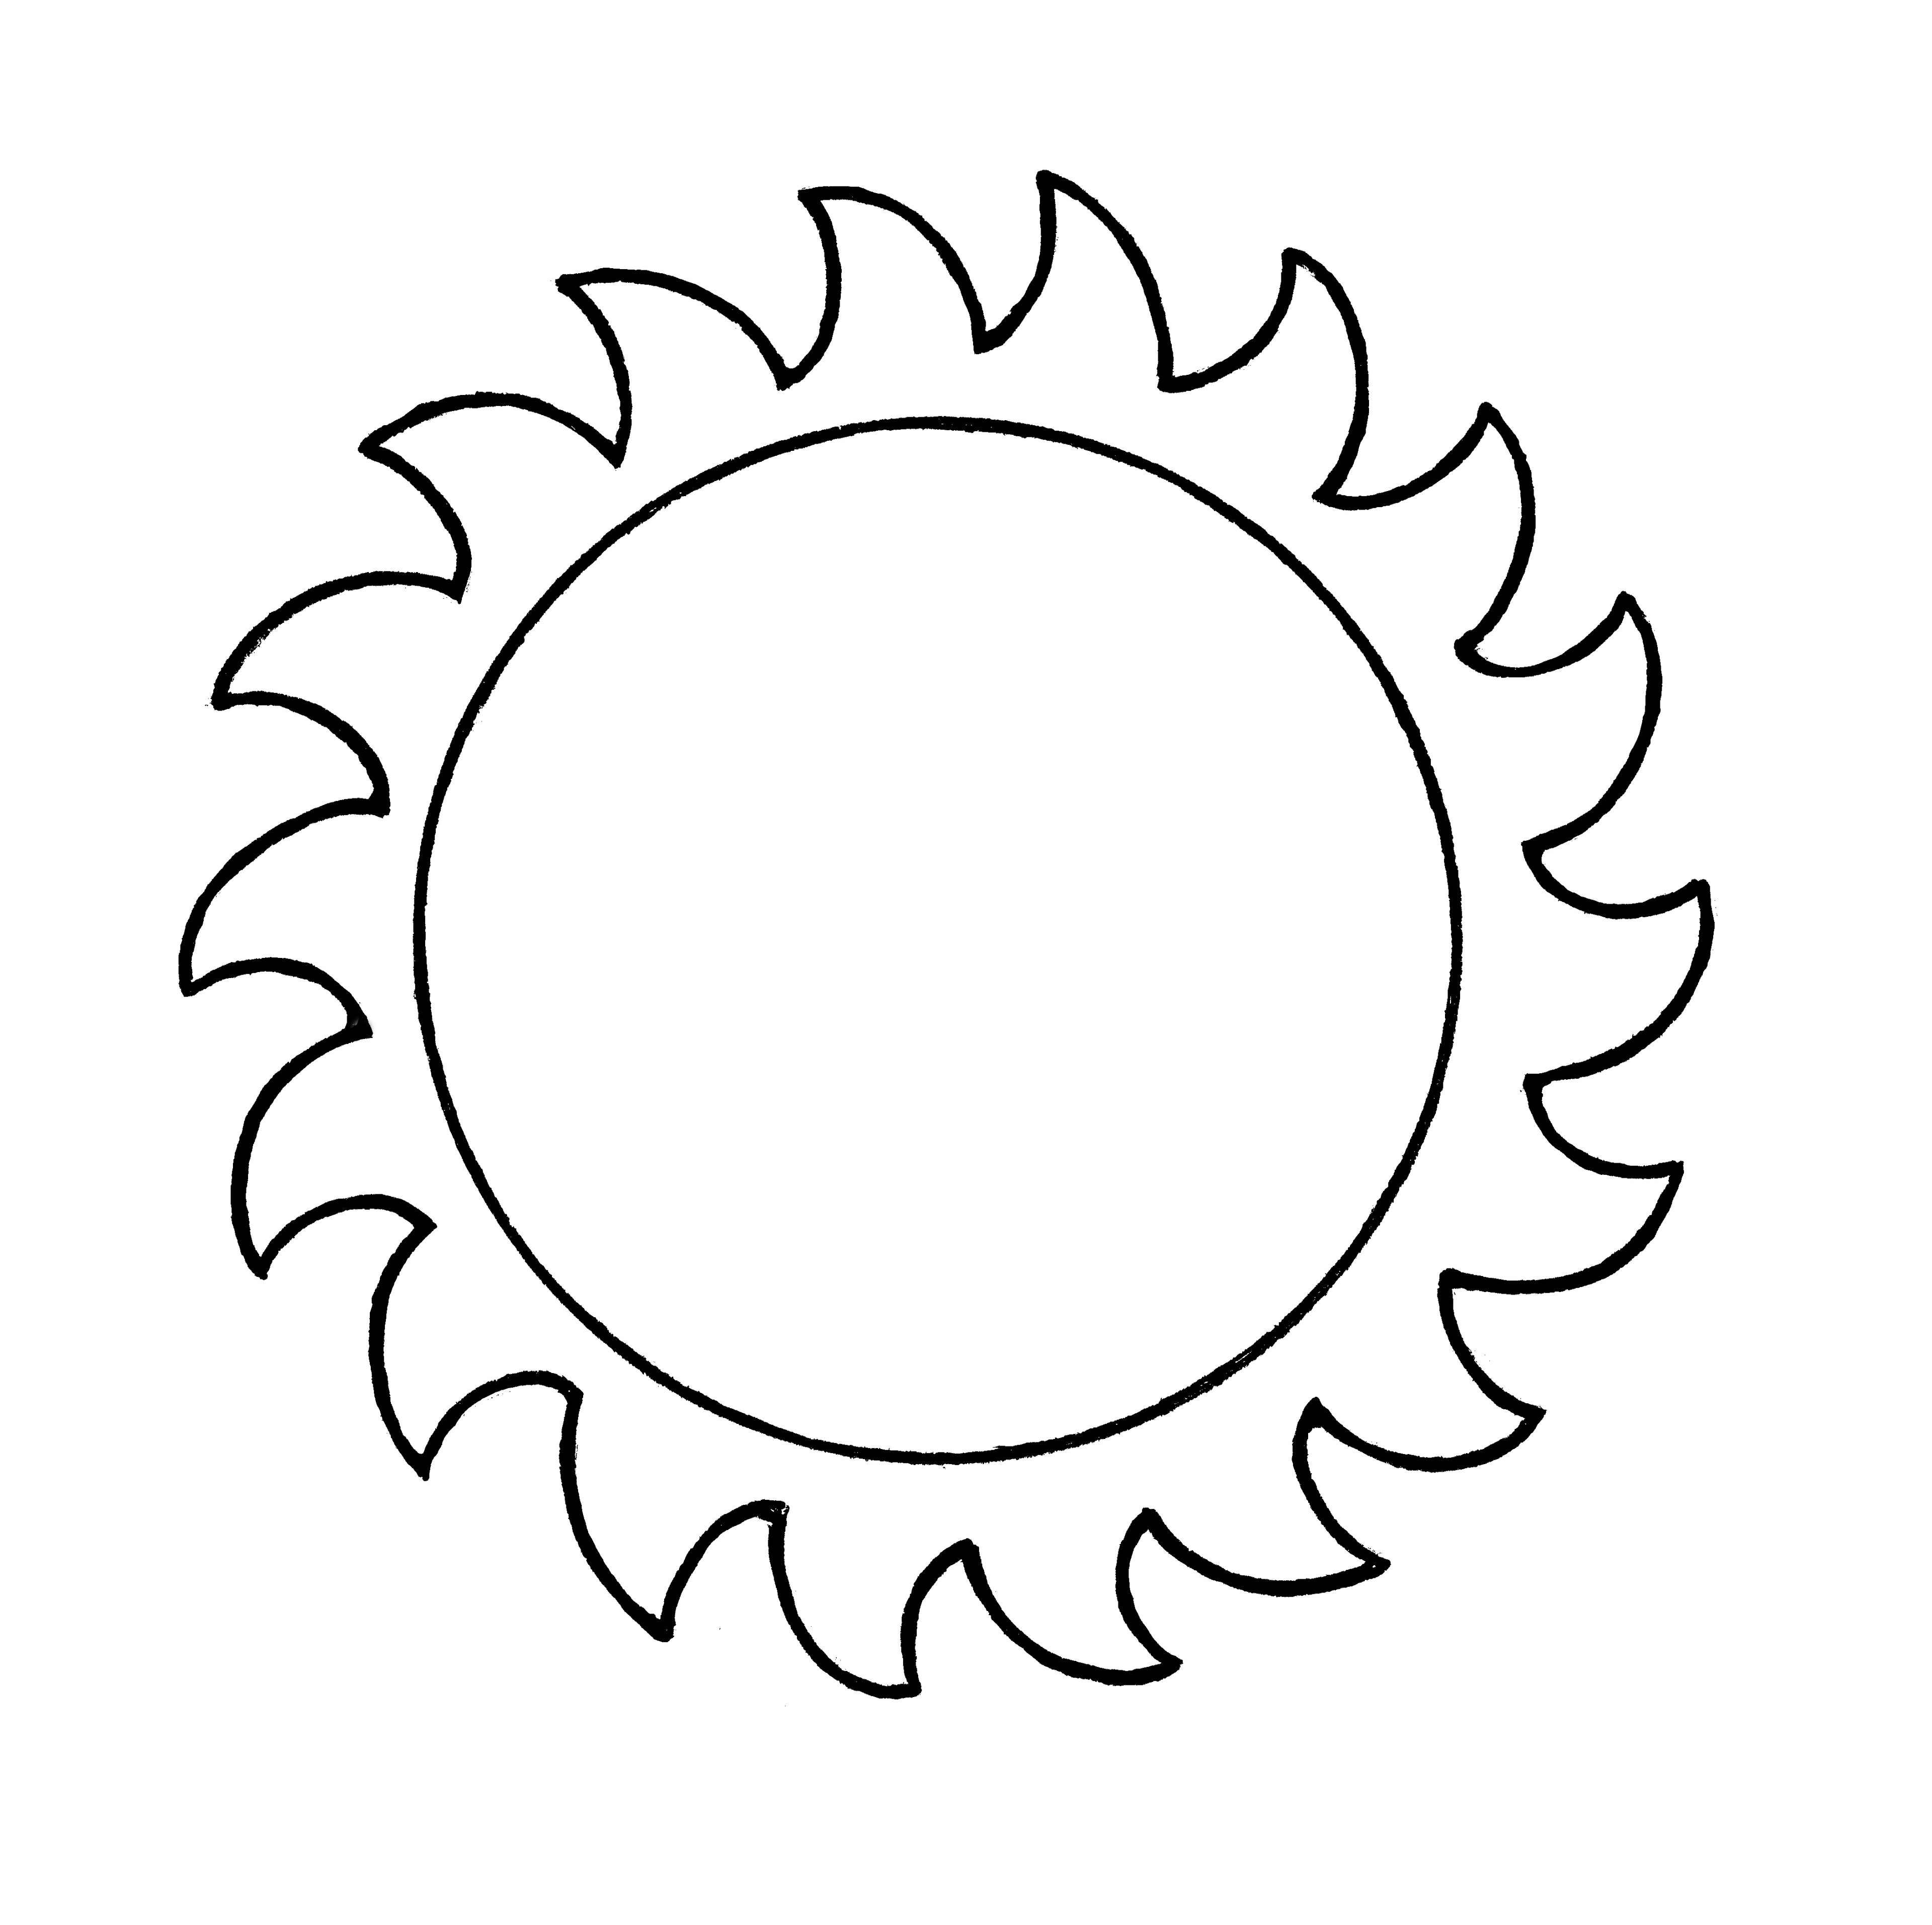 A line drawing of the sun from the nursery manual Behold Your Little Ones (2008), page 35.